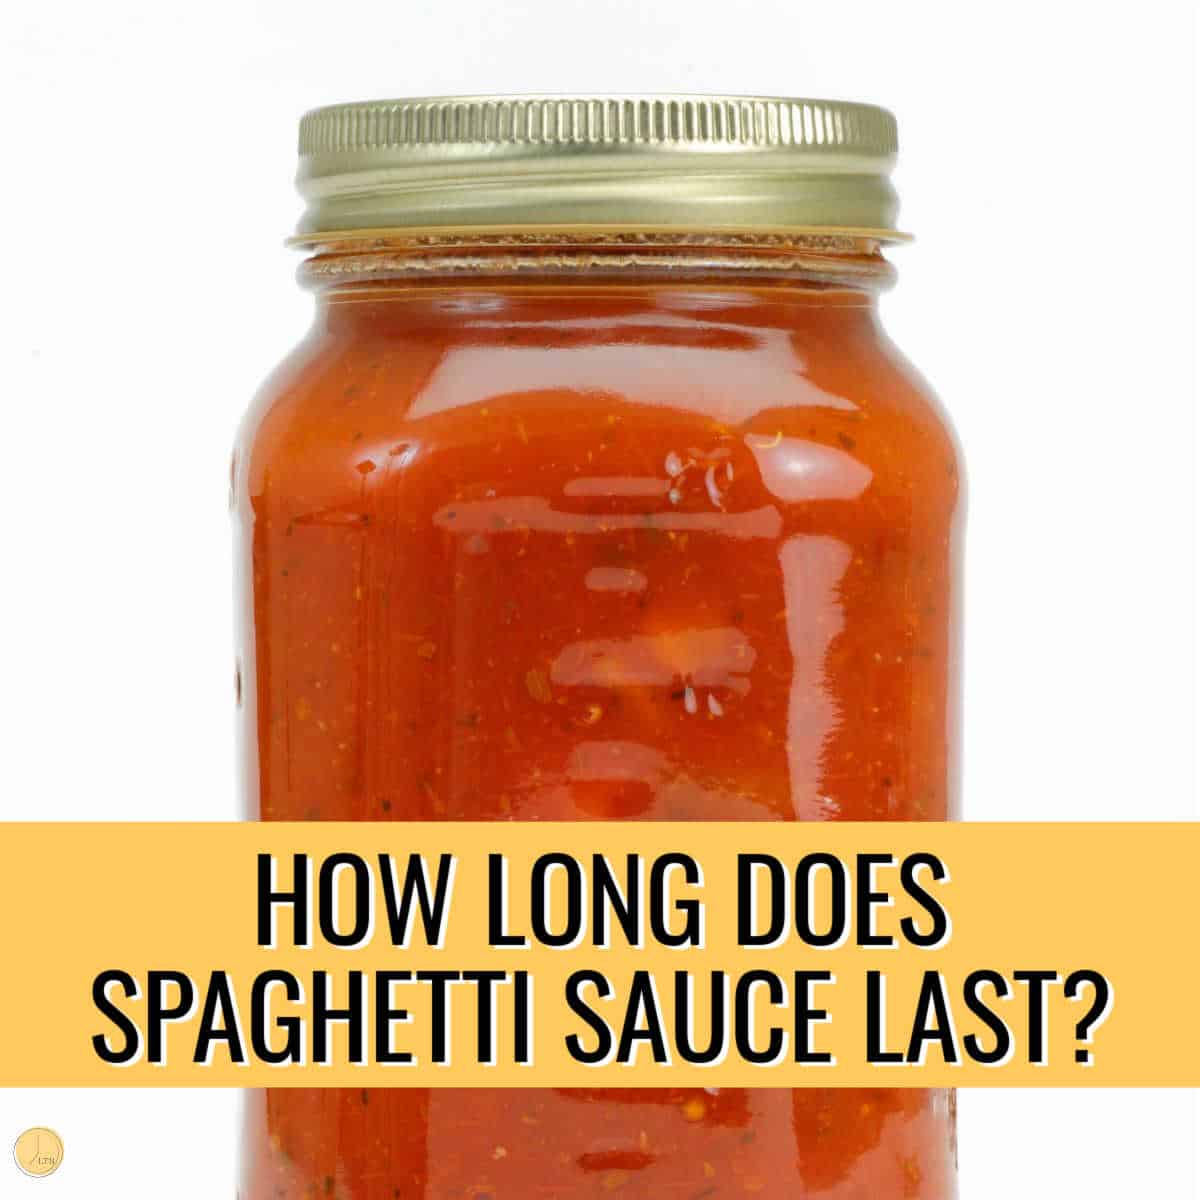 How Long Does Spaghetti Sauce Last in the Refrigerator?